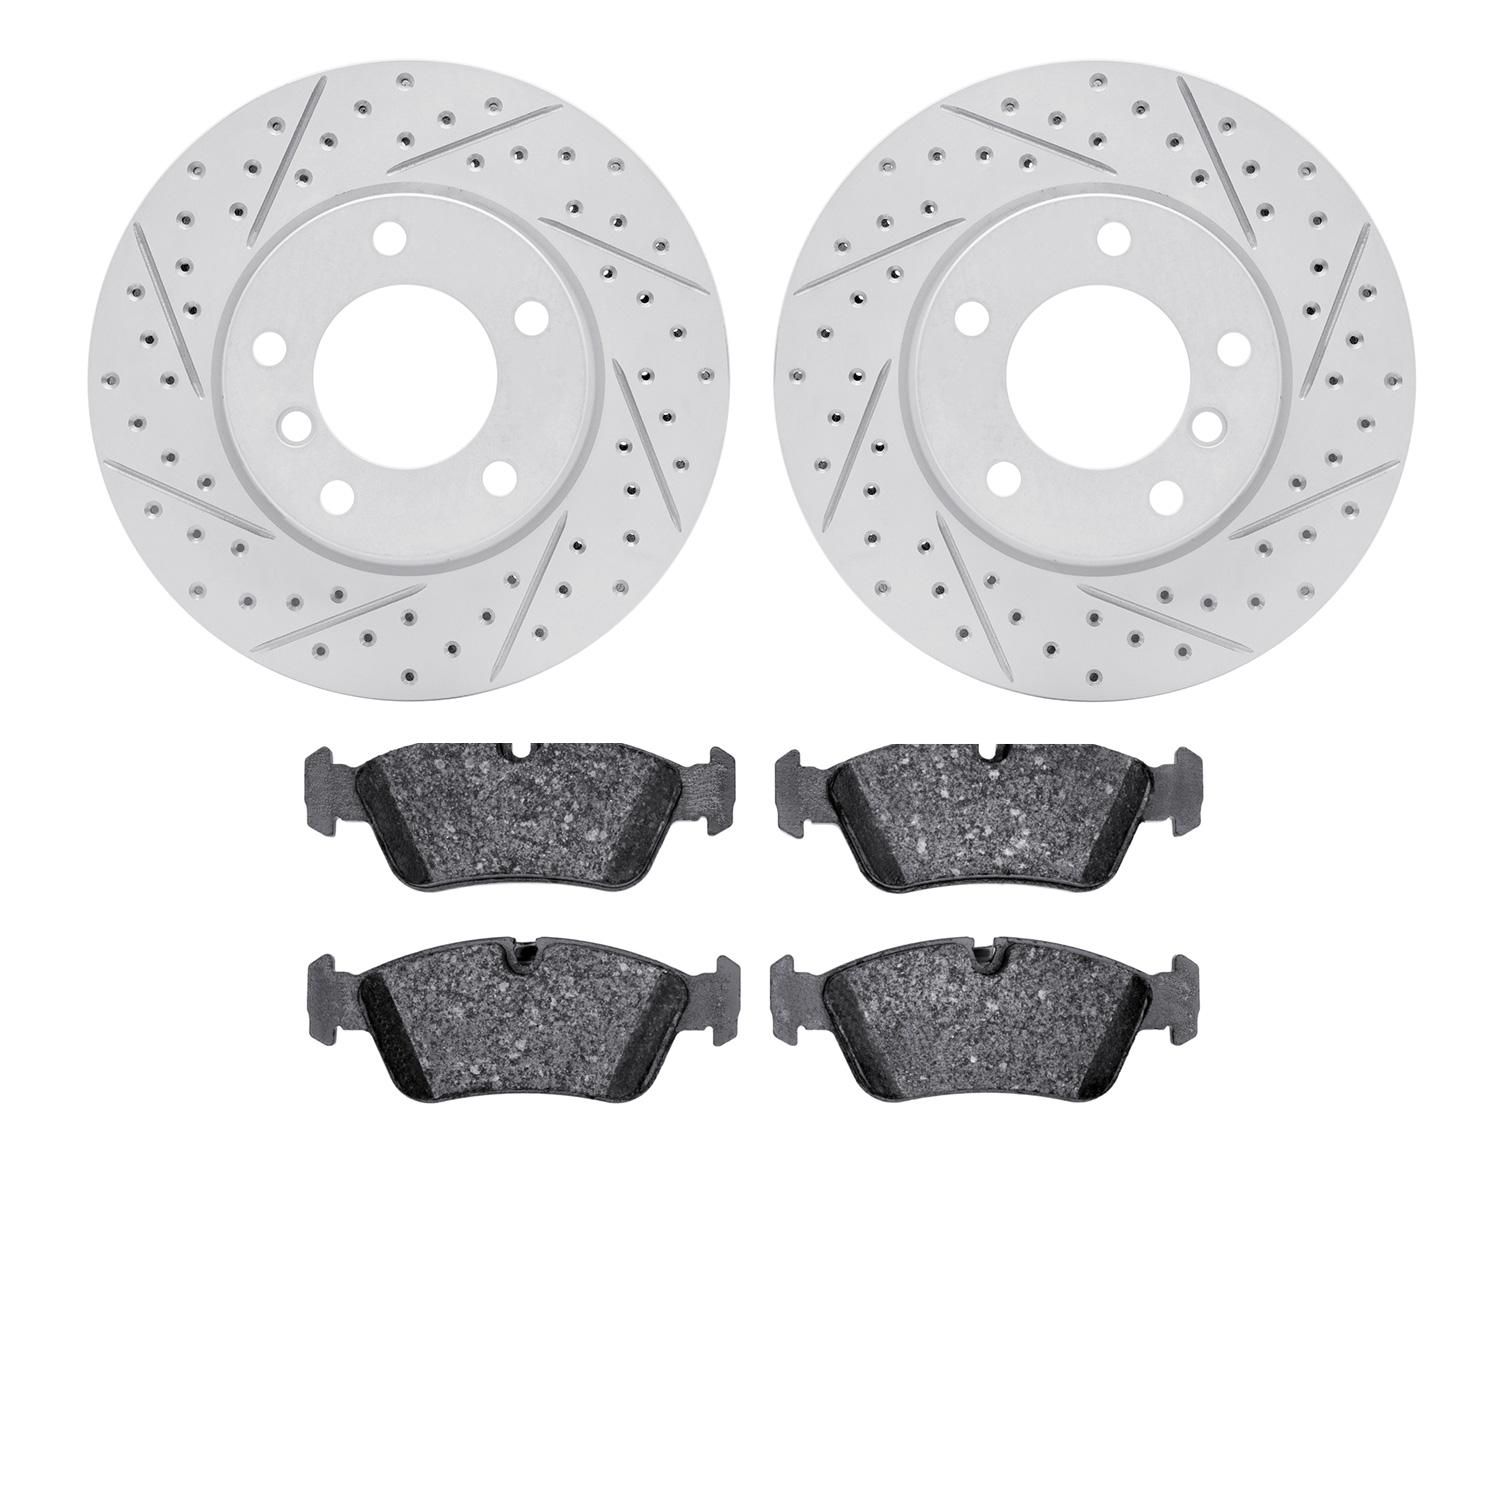 2502-31007 Geoperformance Drilled/Slotted Rotors w/5000 Advanced Brake Pads Kit, 1991-2006 BMW, Position: Front